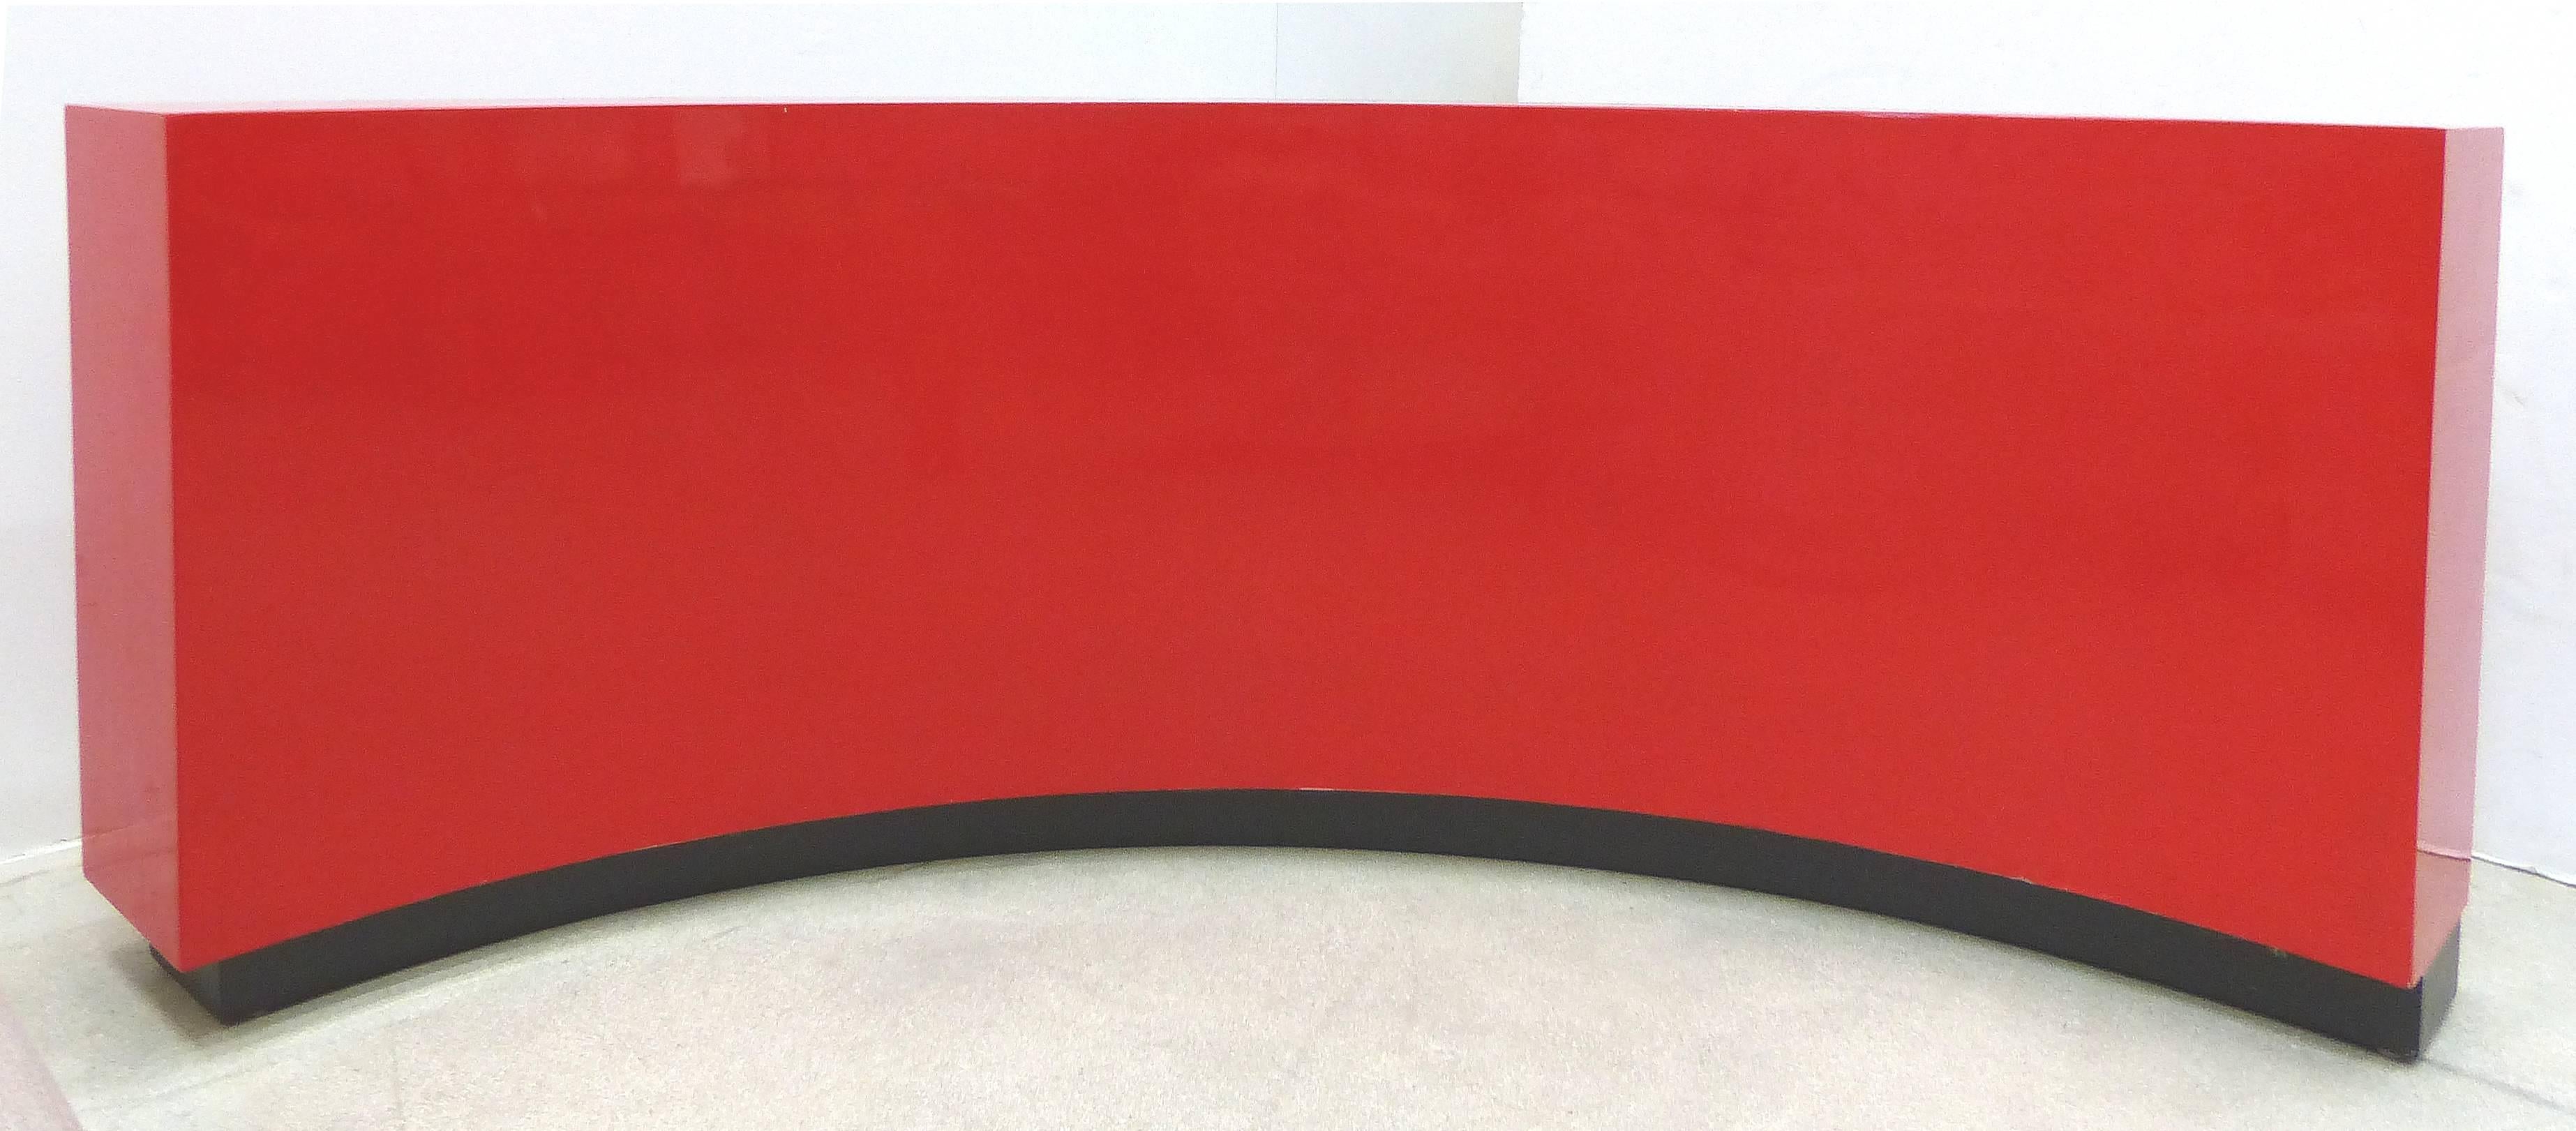 American Art Deco Curved Red Lacquer Bookcase by Paul Laszlo